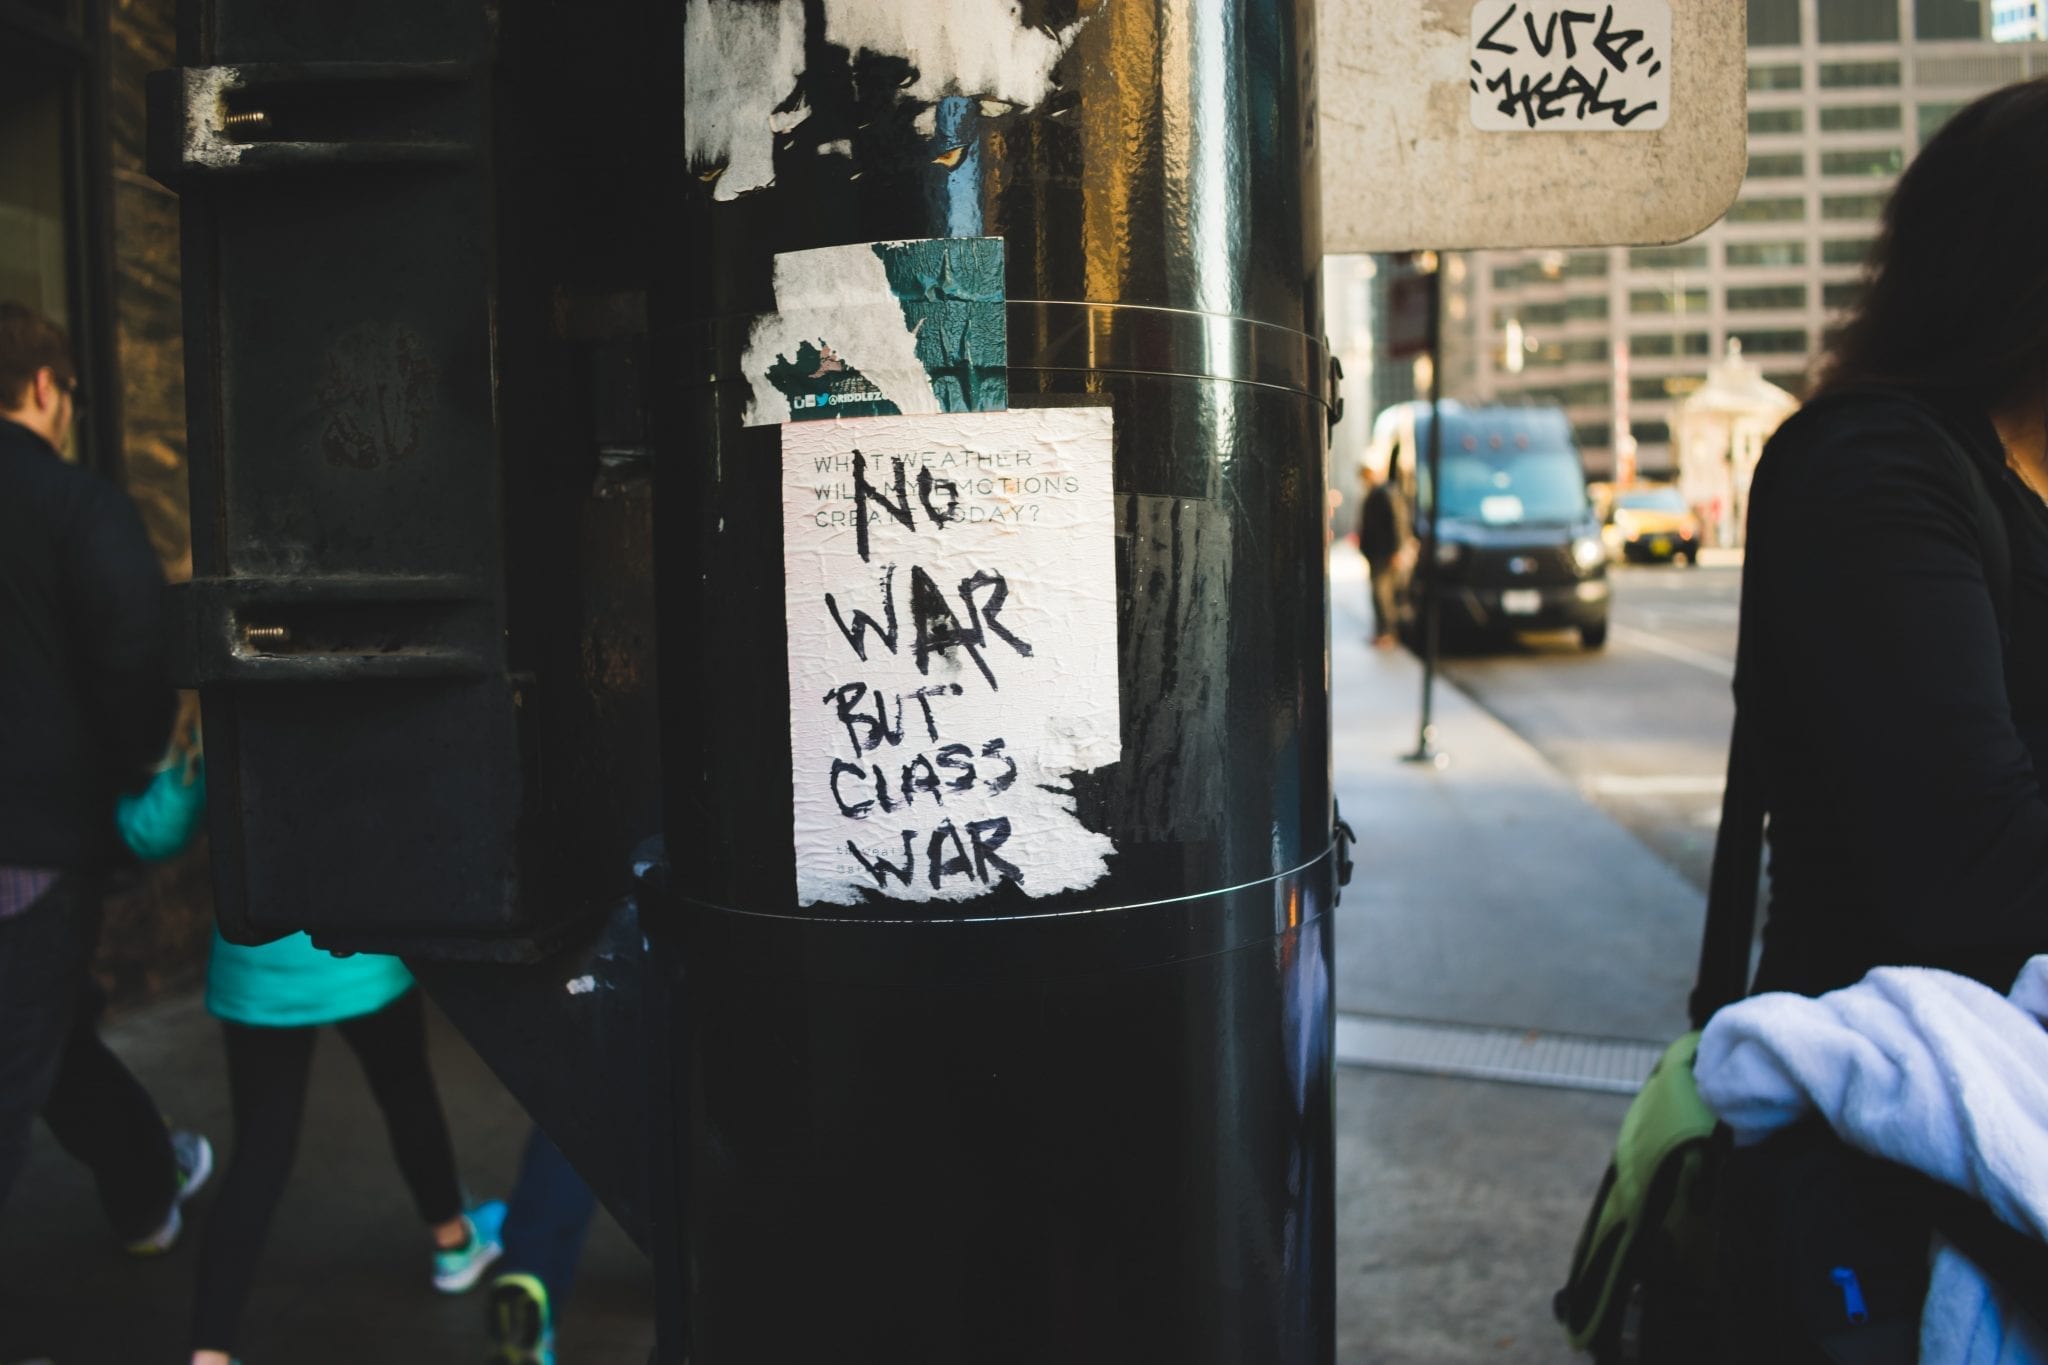 A handwritten sign on ripped paper attached to a pole in Chicago reads "No War But Class War."